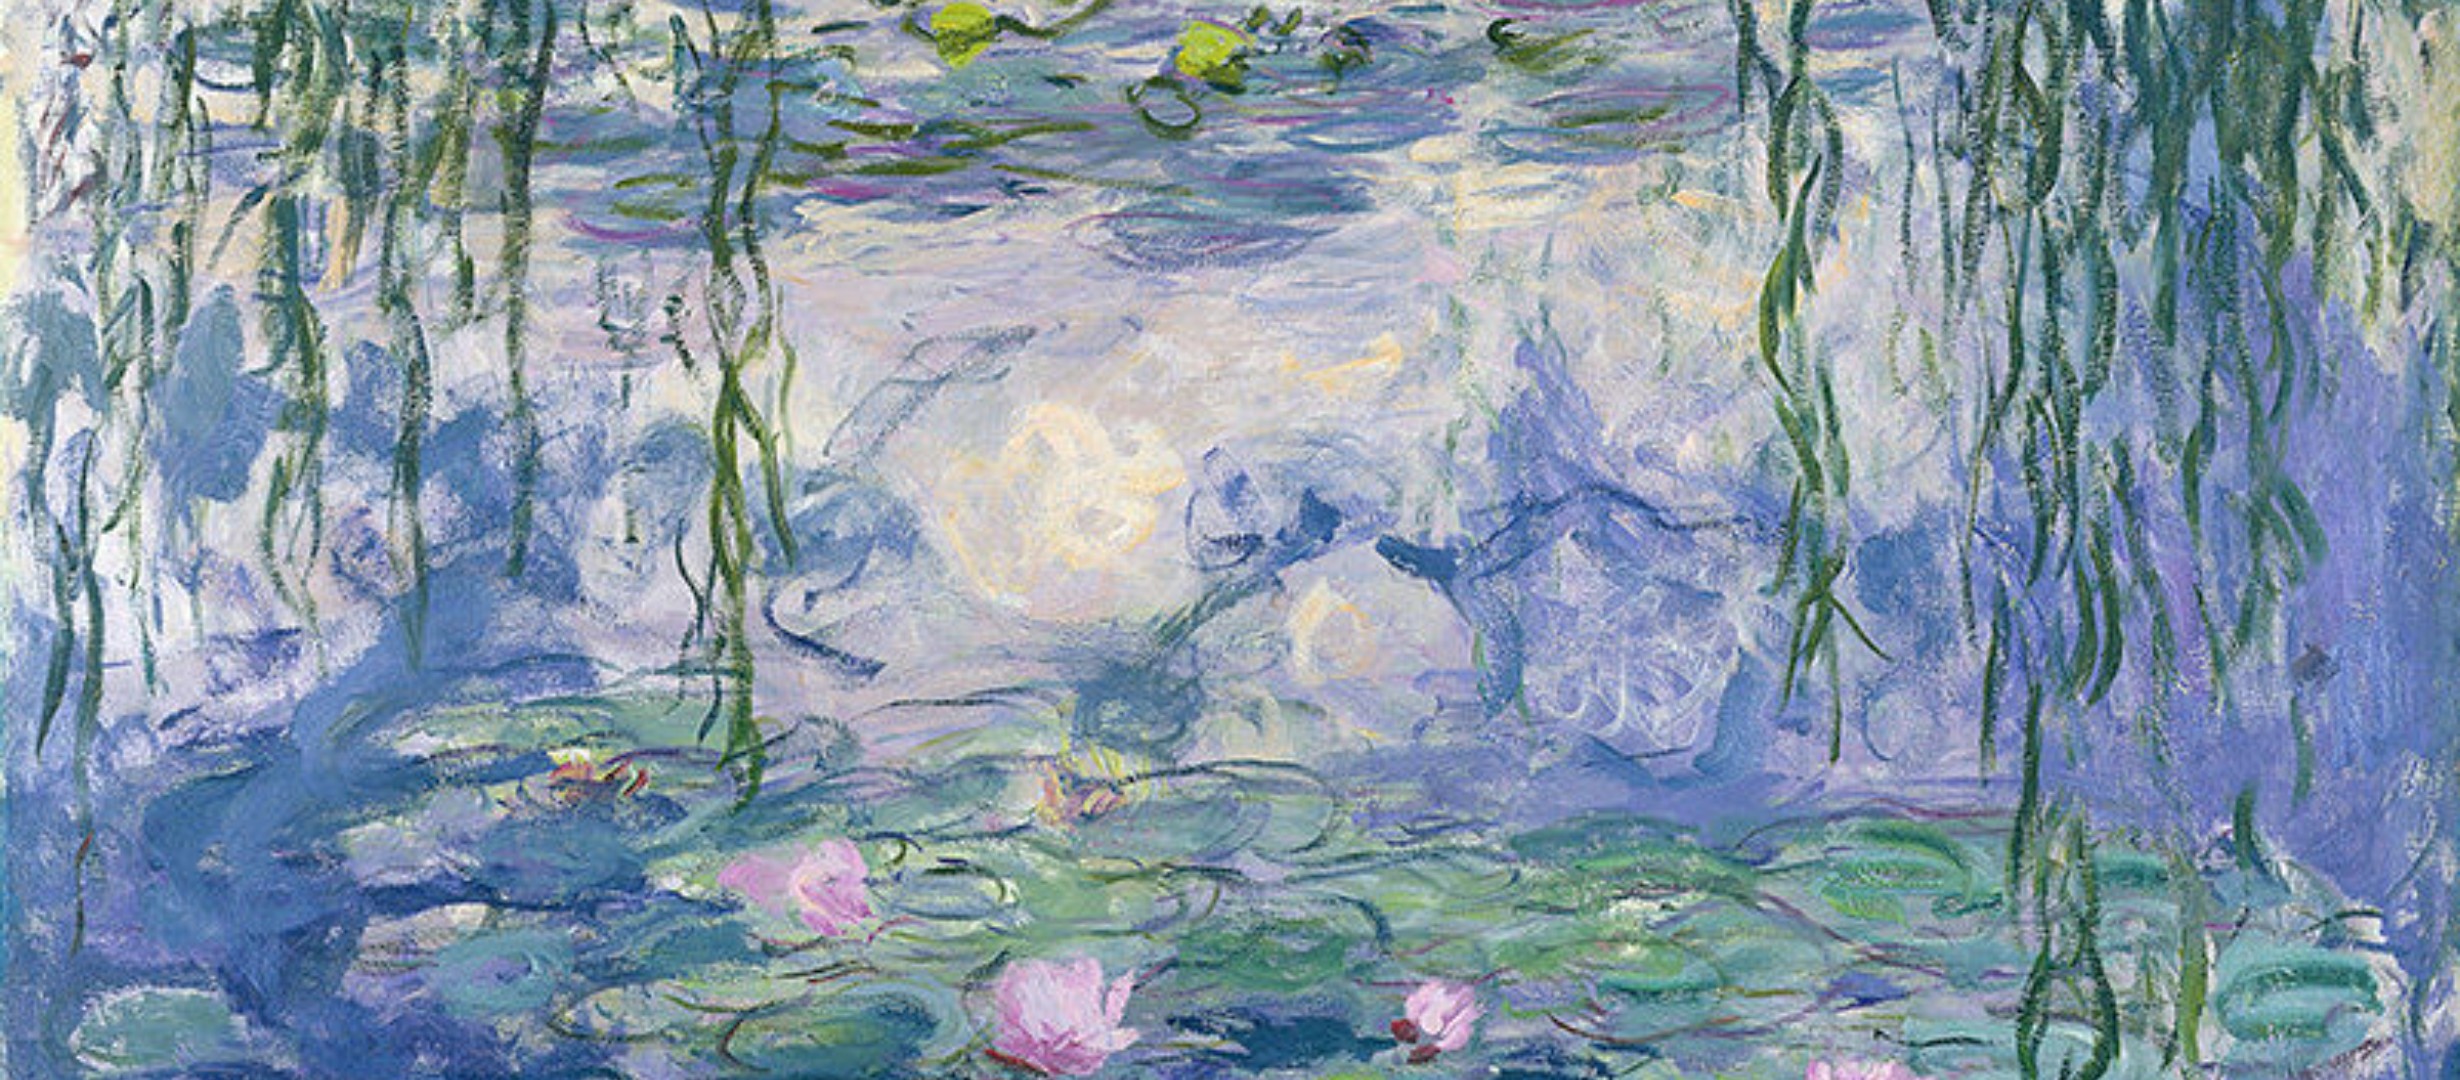 Water Lilies painting by Claude Monet